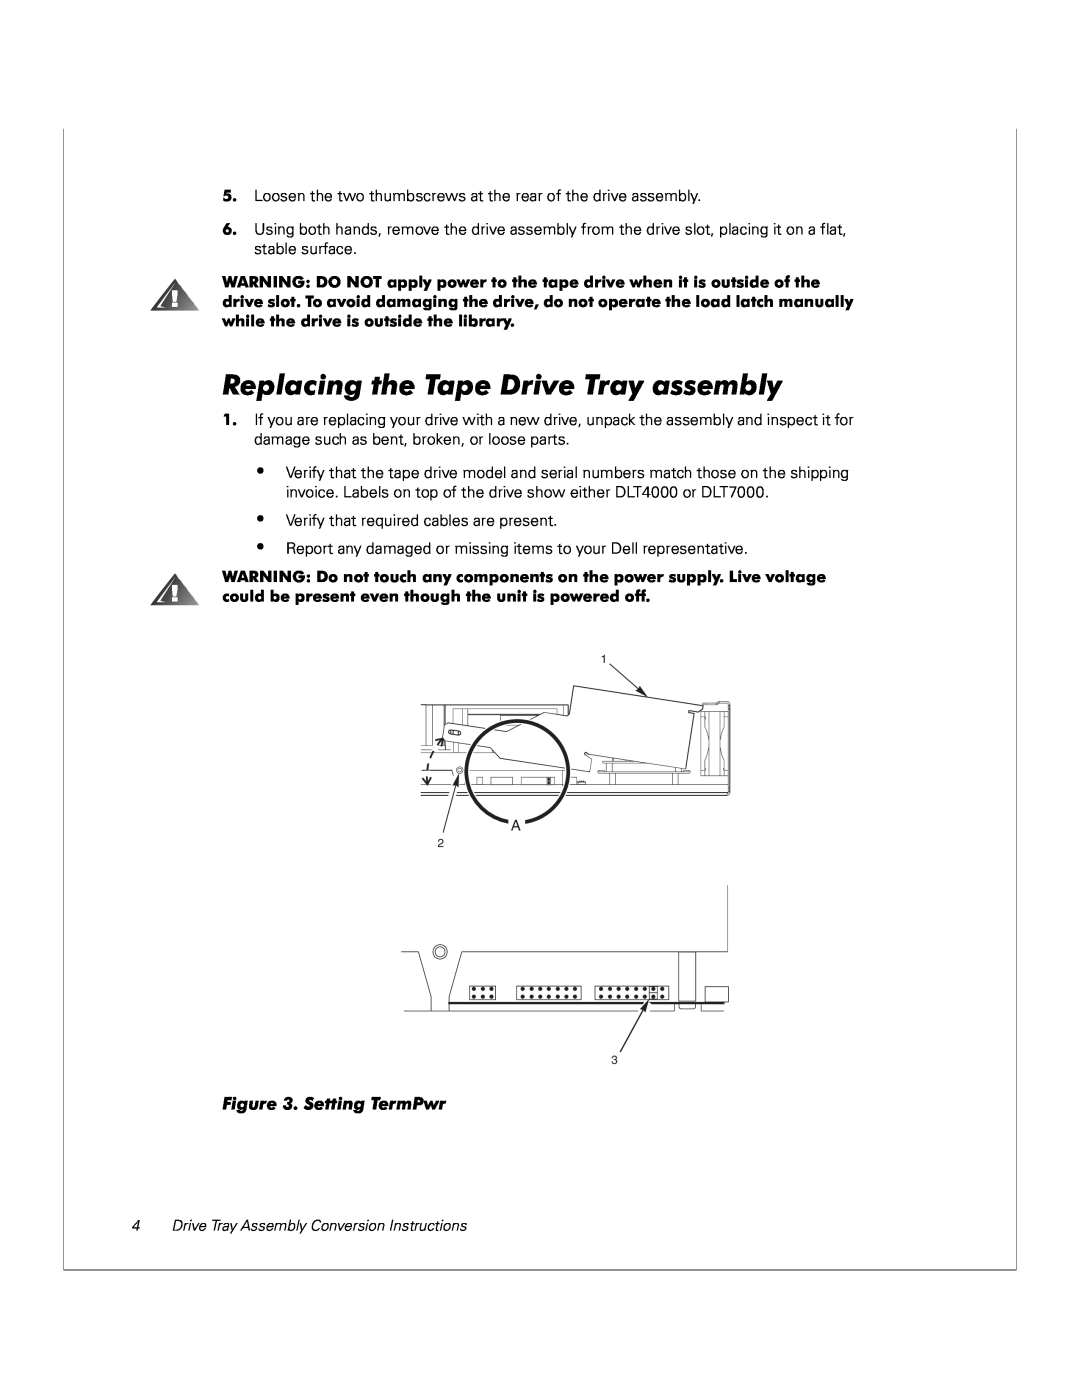 Dell 130T manual Replacing the Tape Drive Tray assembly, Setting TermPwr 